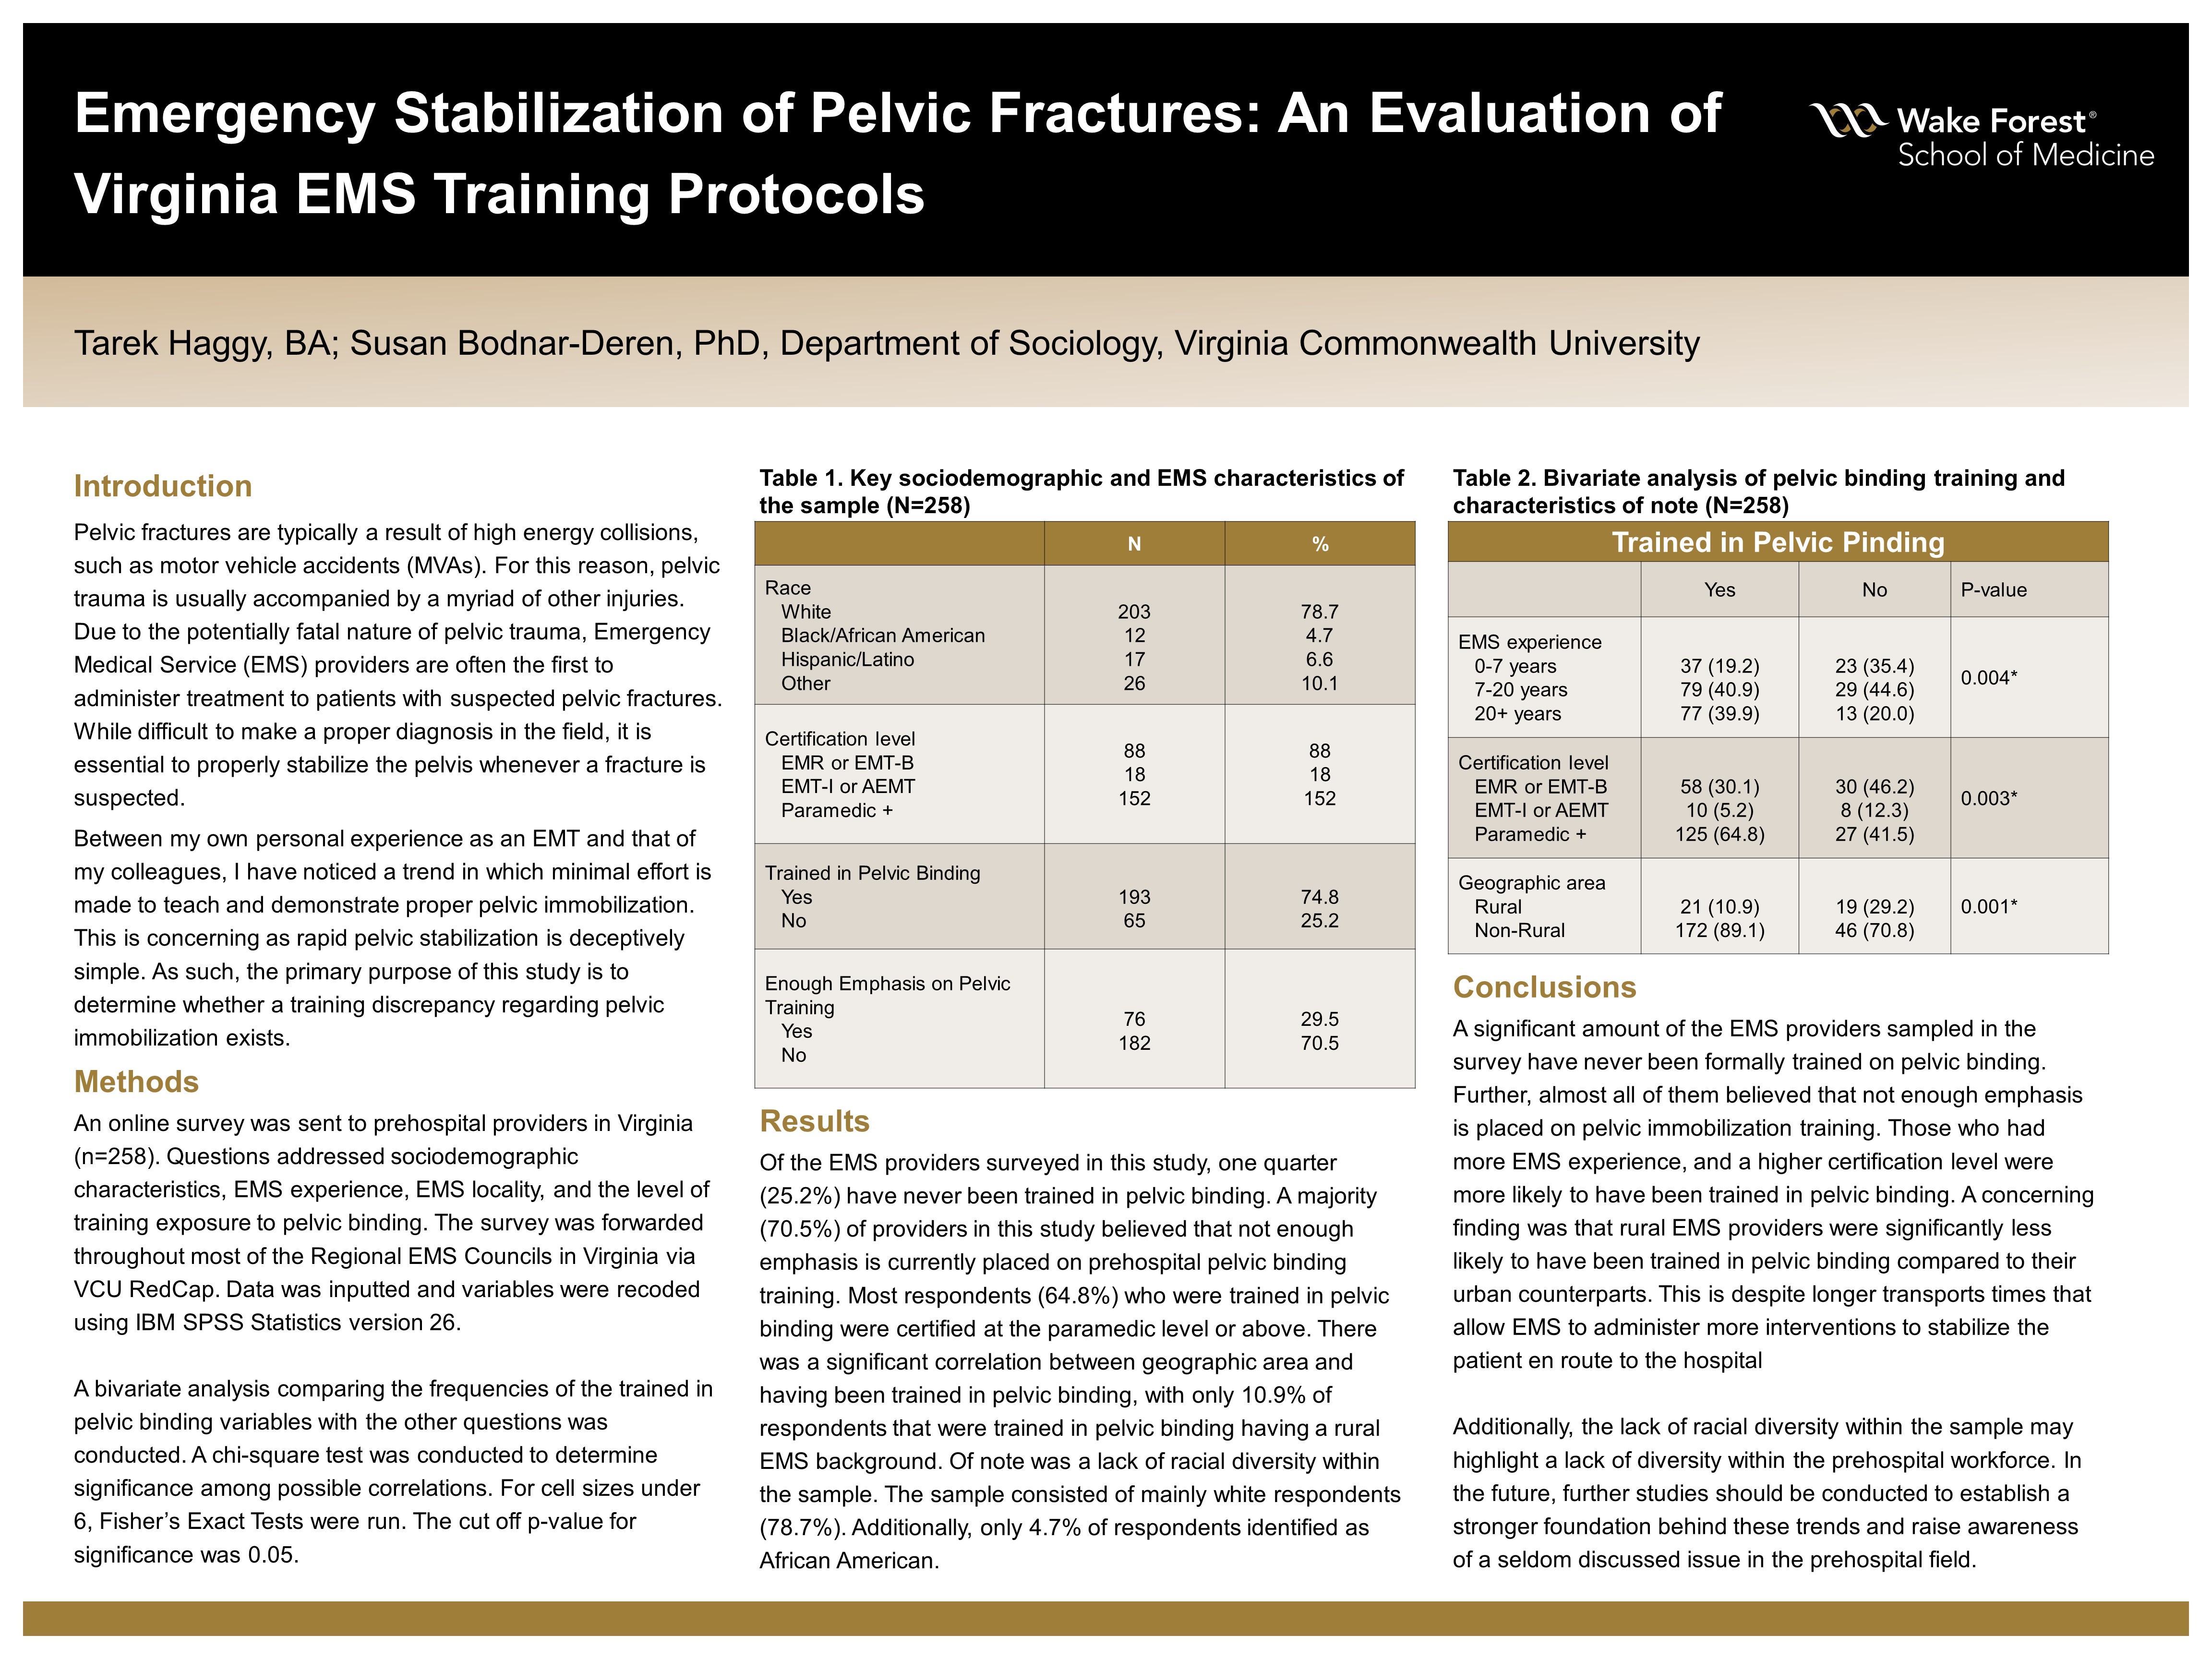 Showcase Image for Emergency Stabilization of Pelvic Fractures: An Evaluation of  Virginia EMS Training Protocols